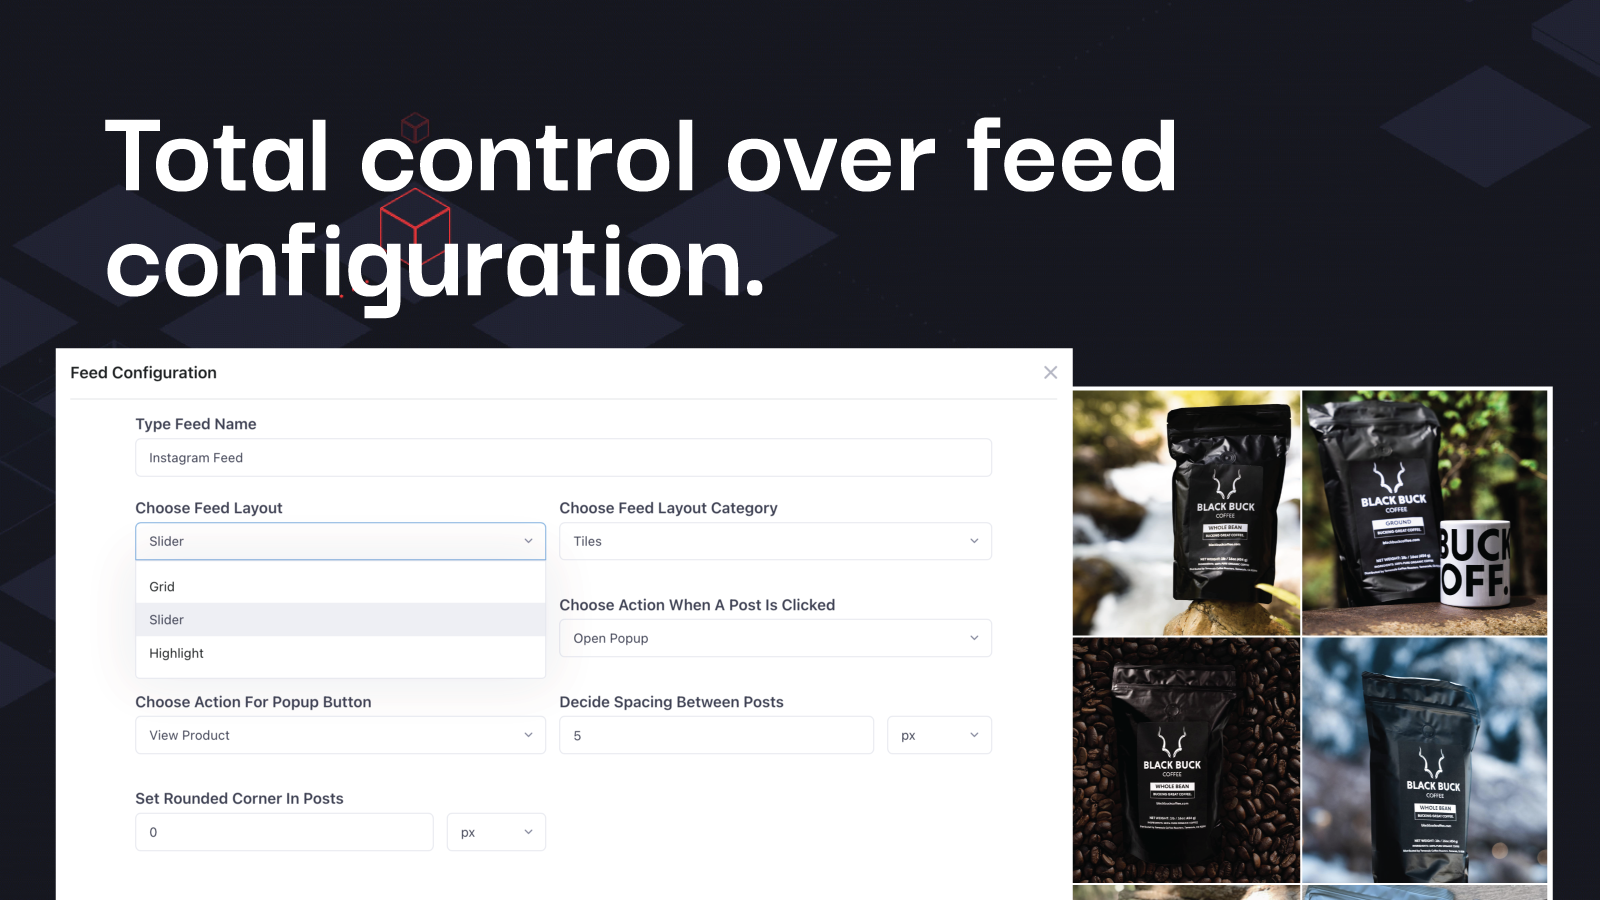 Total control over feed configuration